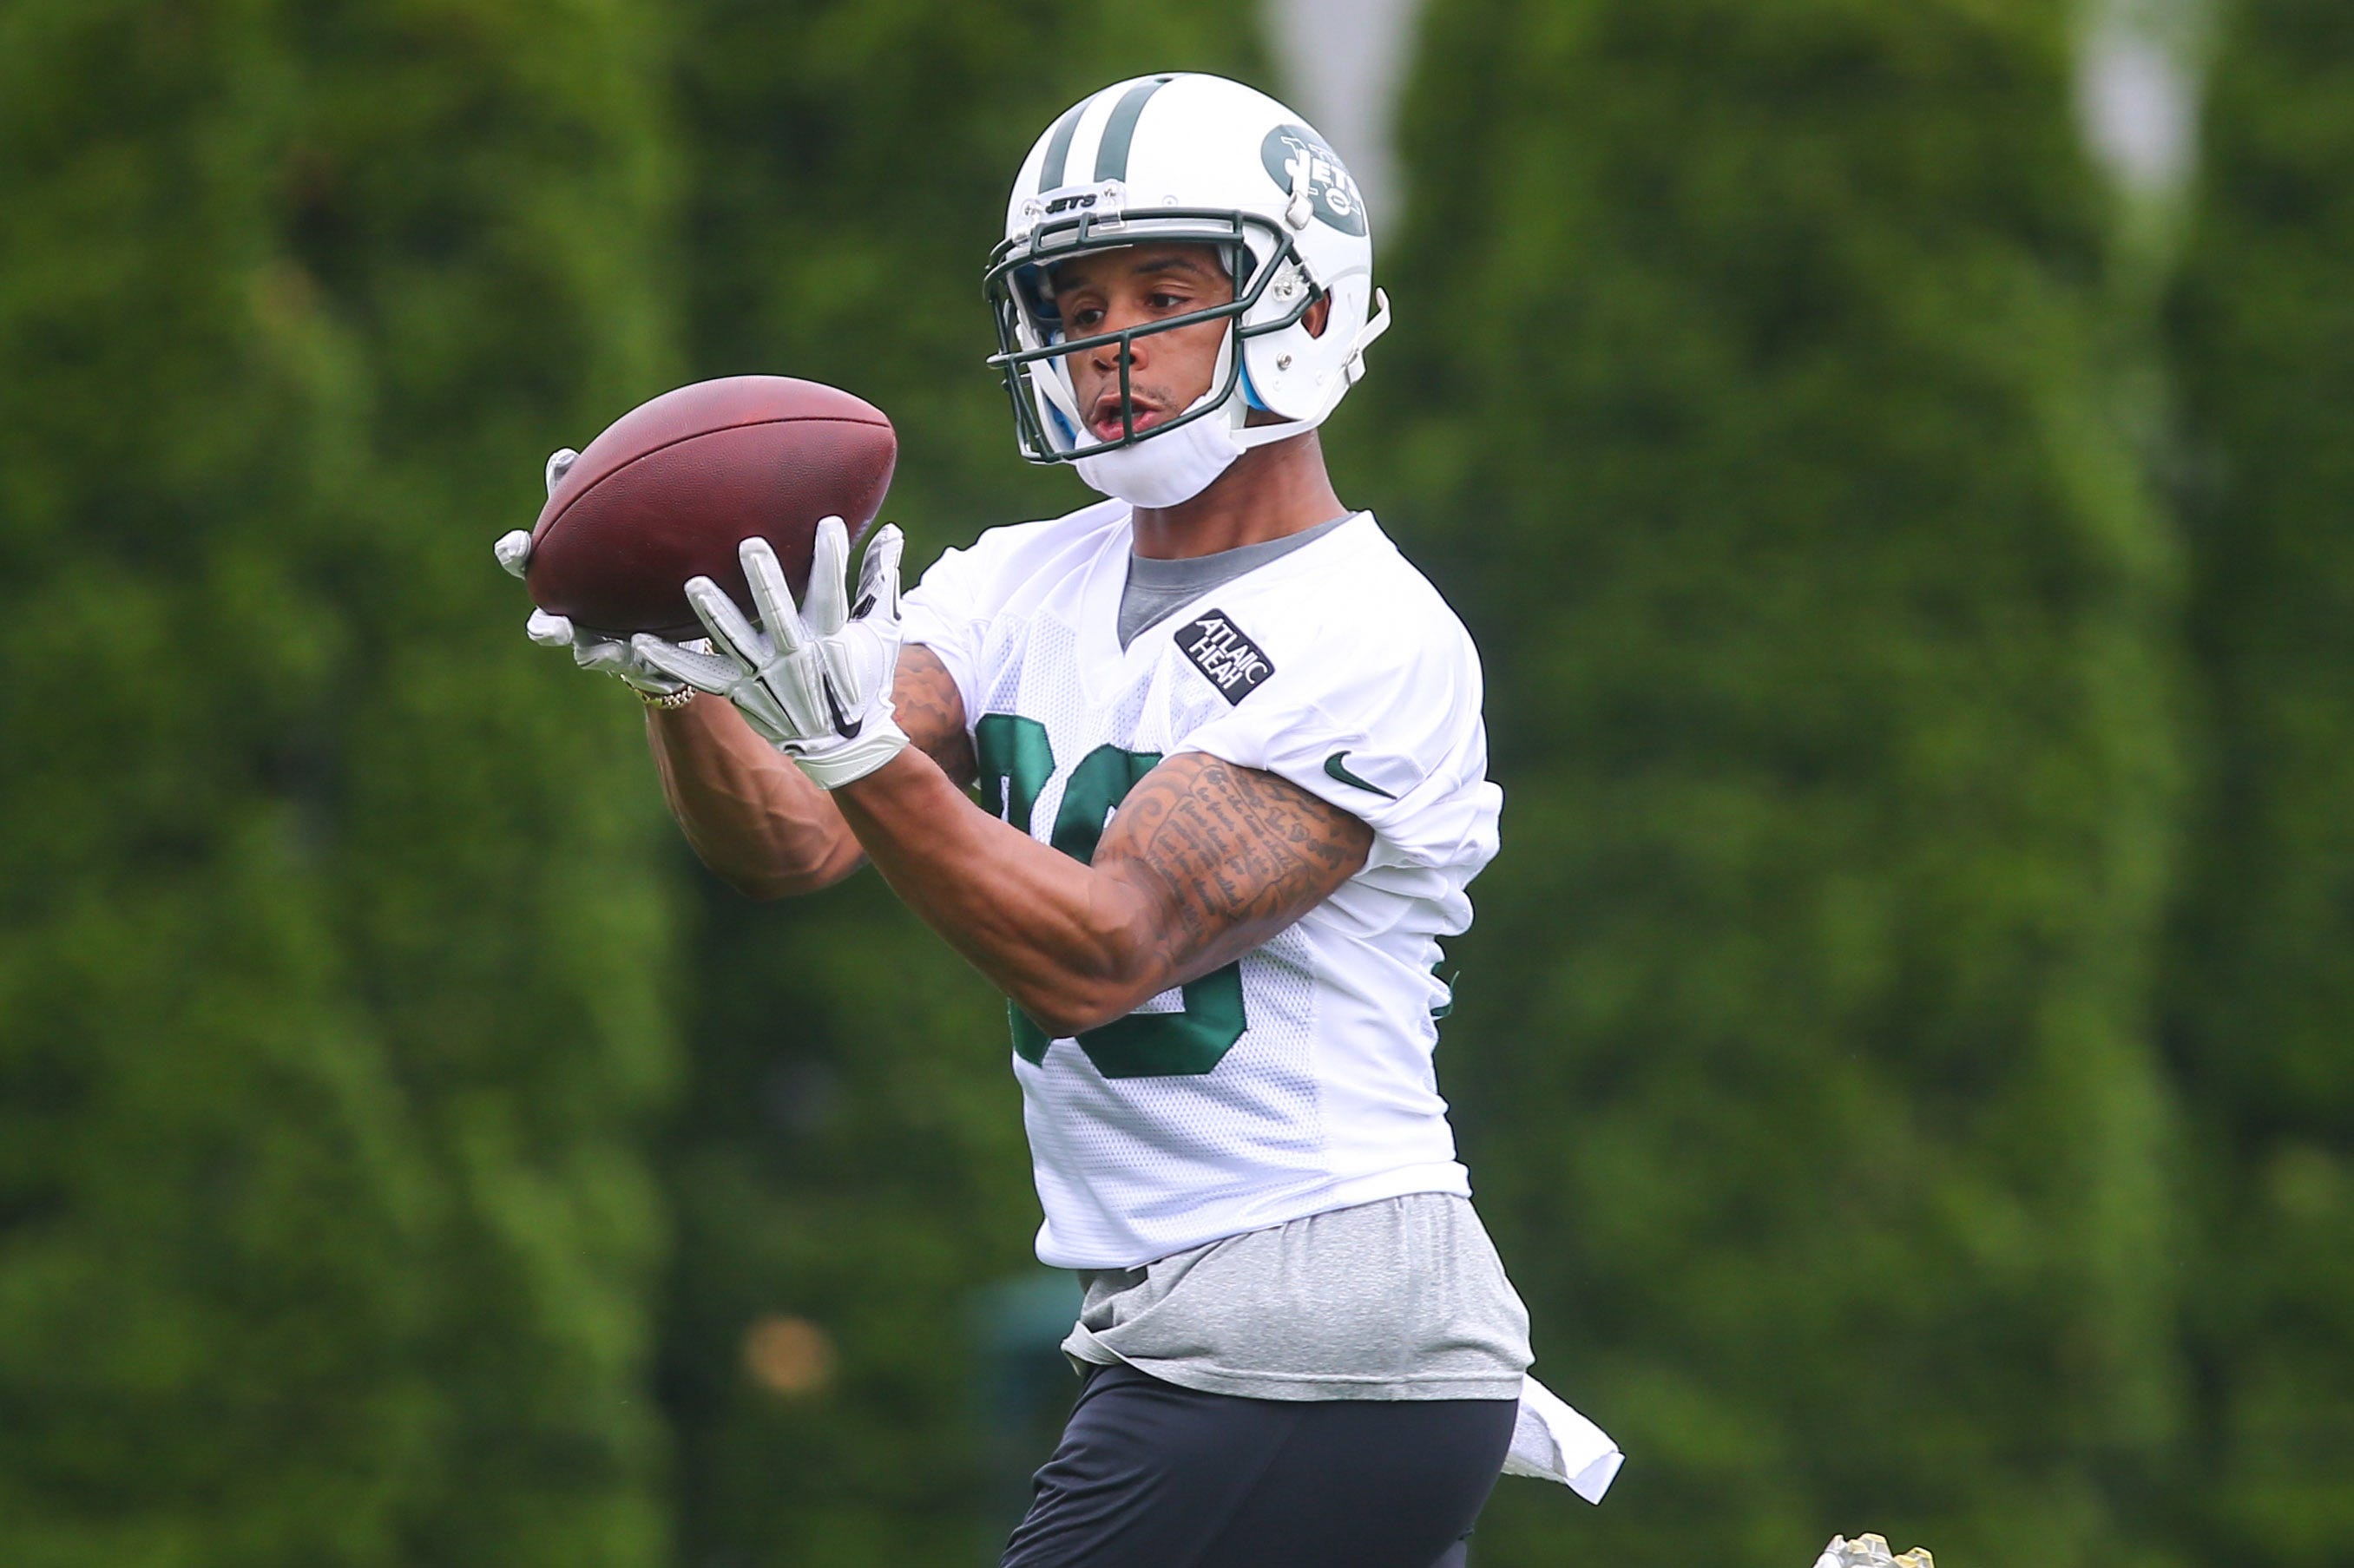 Jets waive former second-round wide receiver Devin Smith